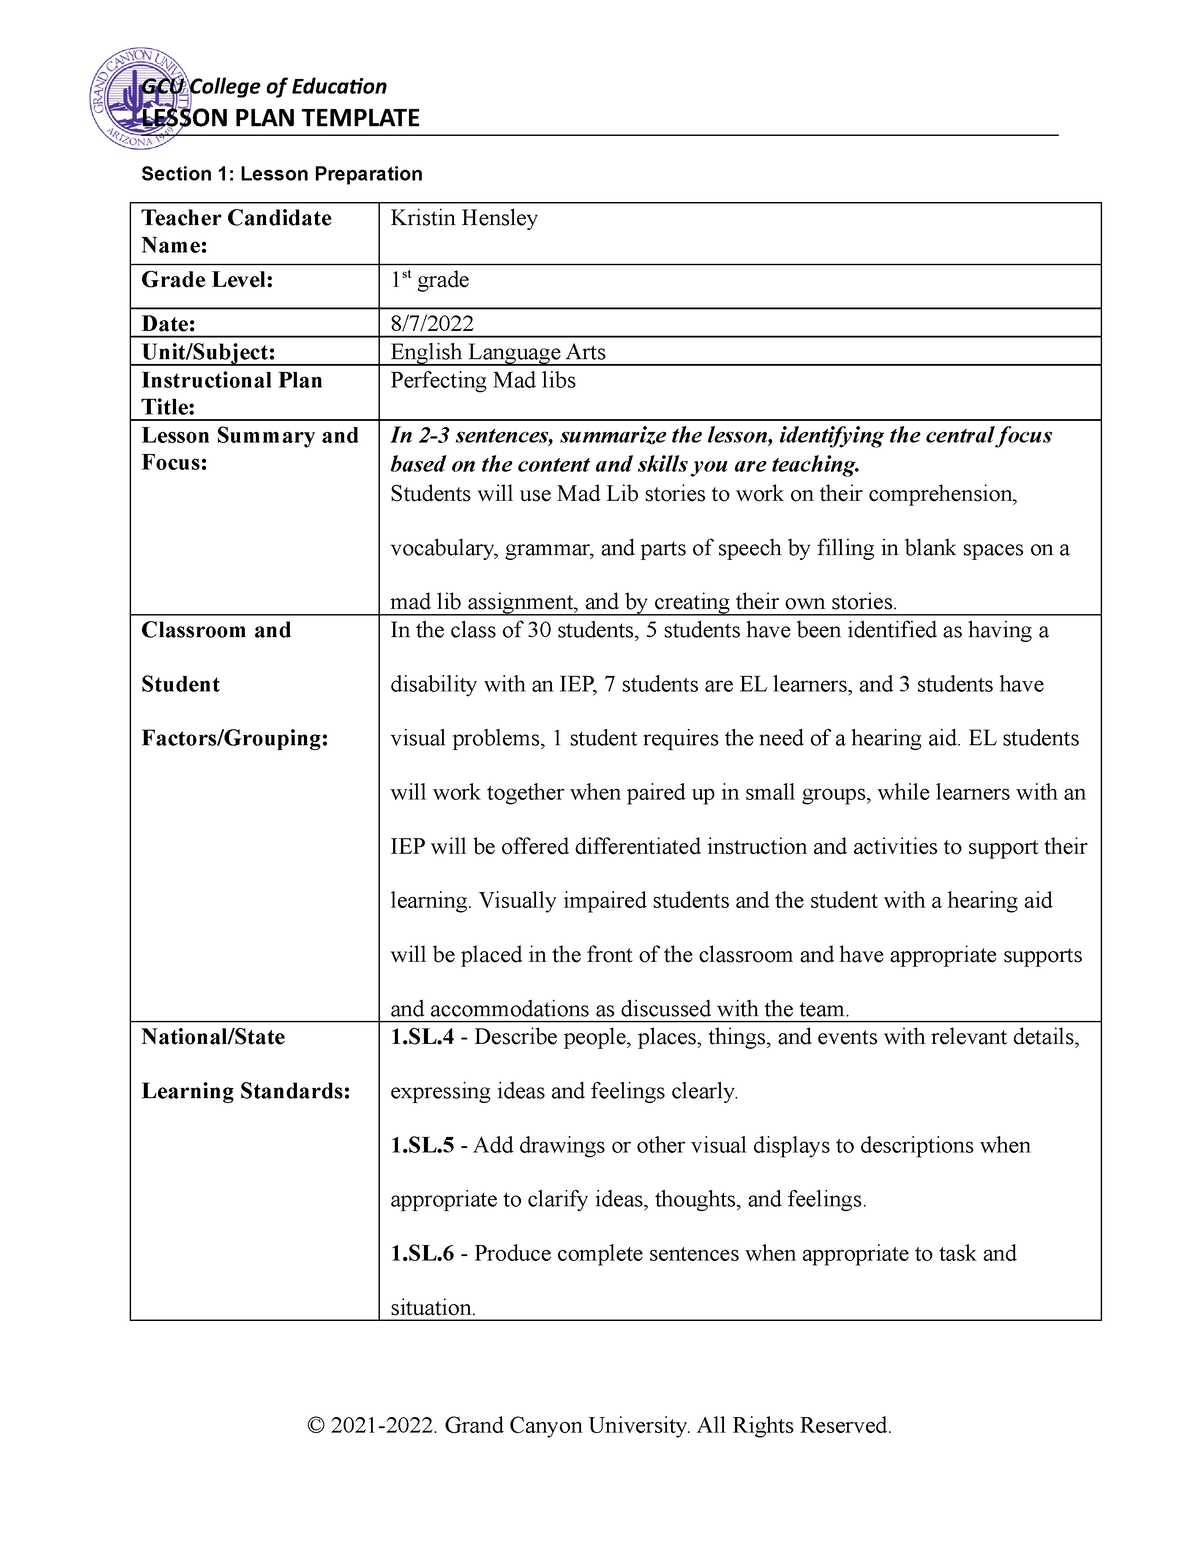 gcu-esl-440n-benchmark-lesson-planning-for-english-language-learners-lesson-plan-template